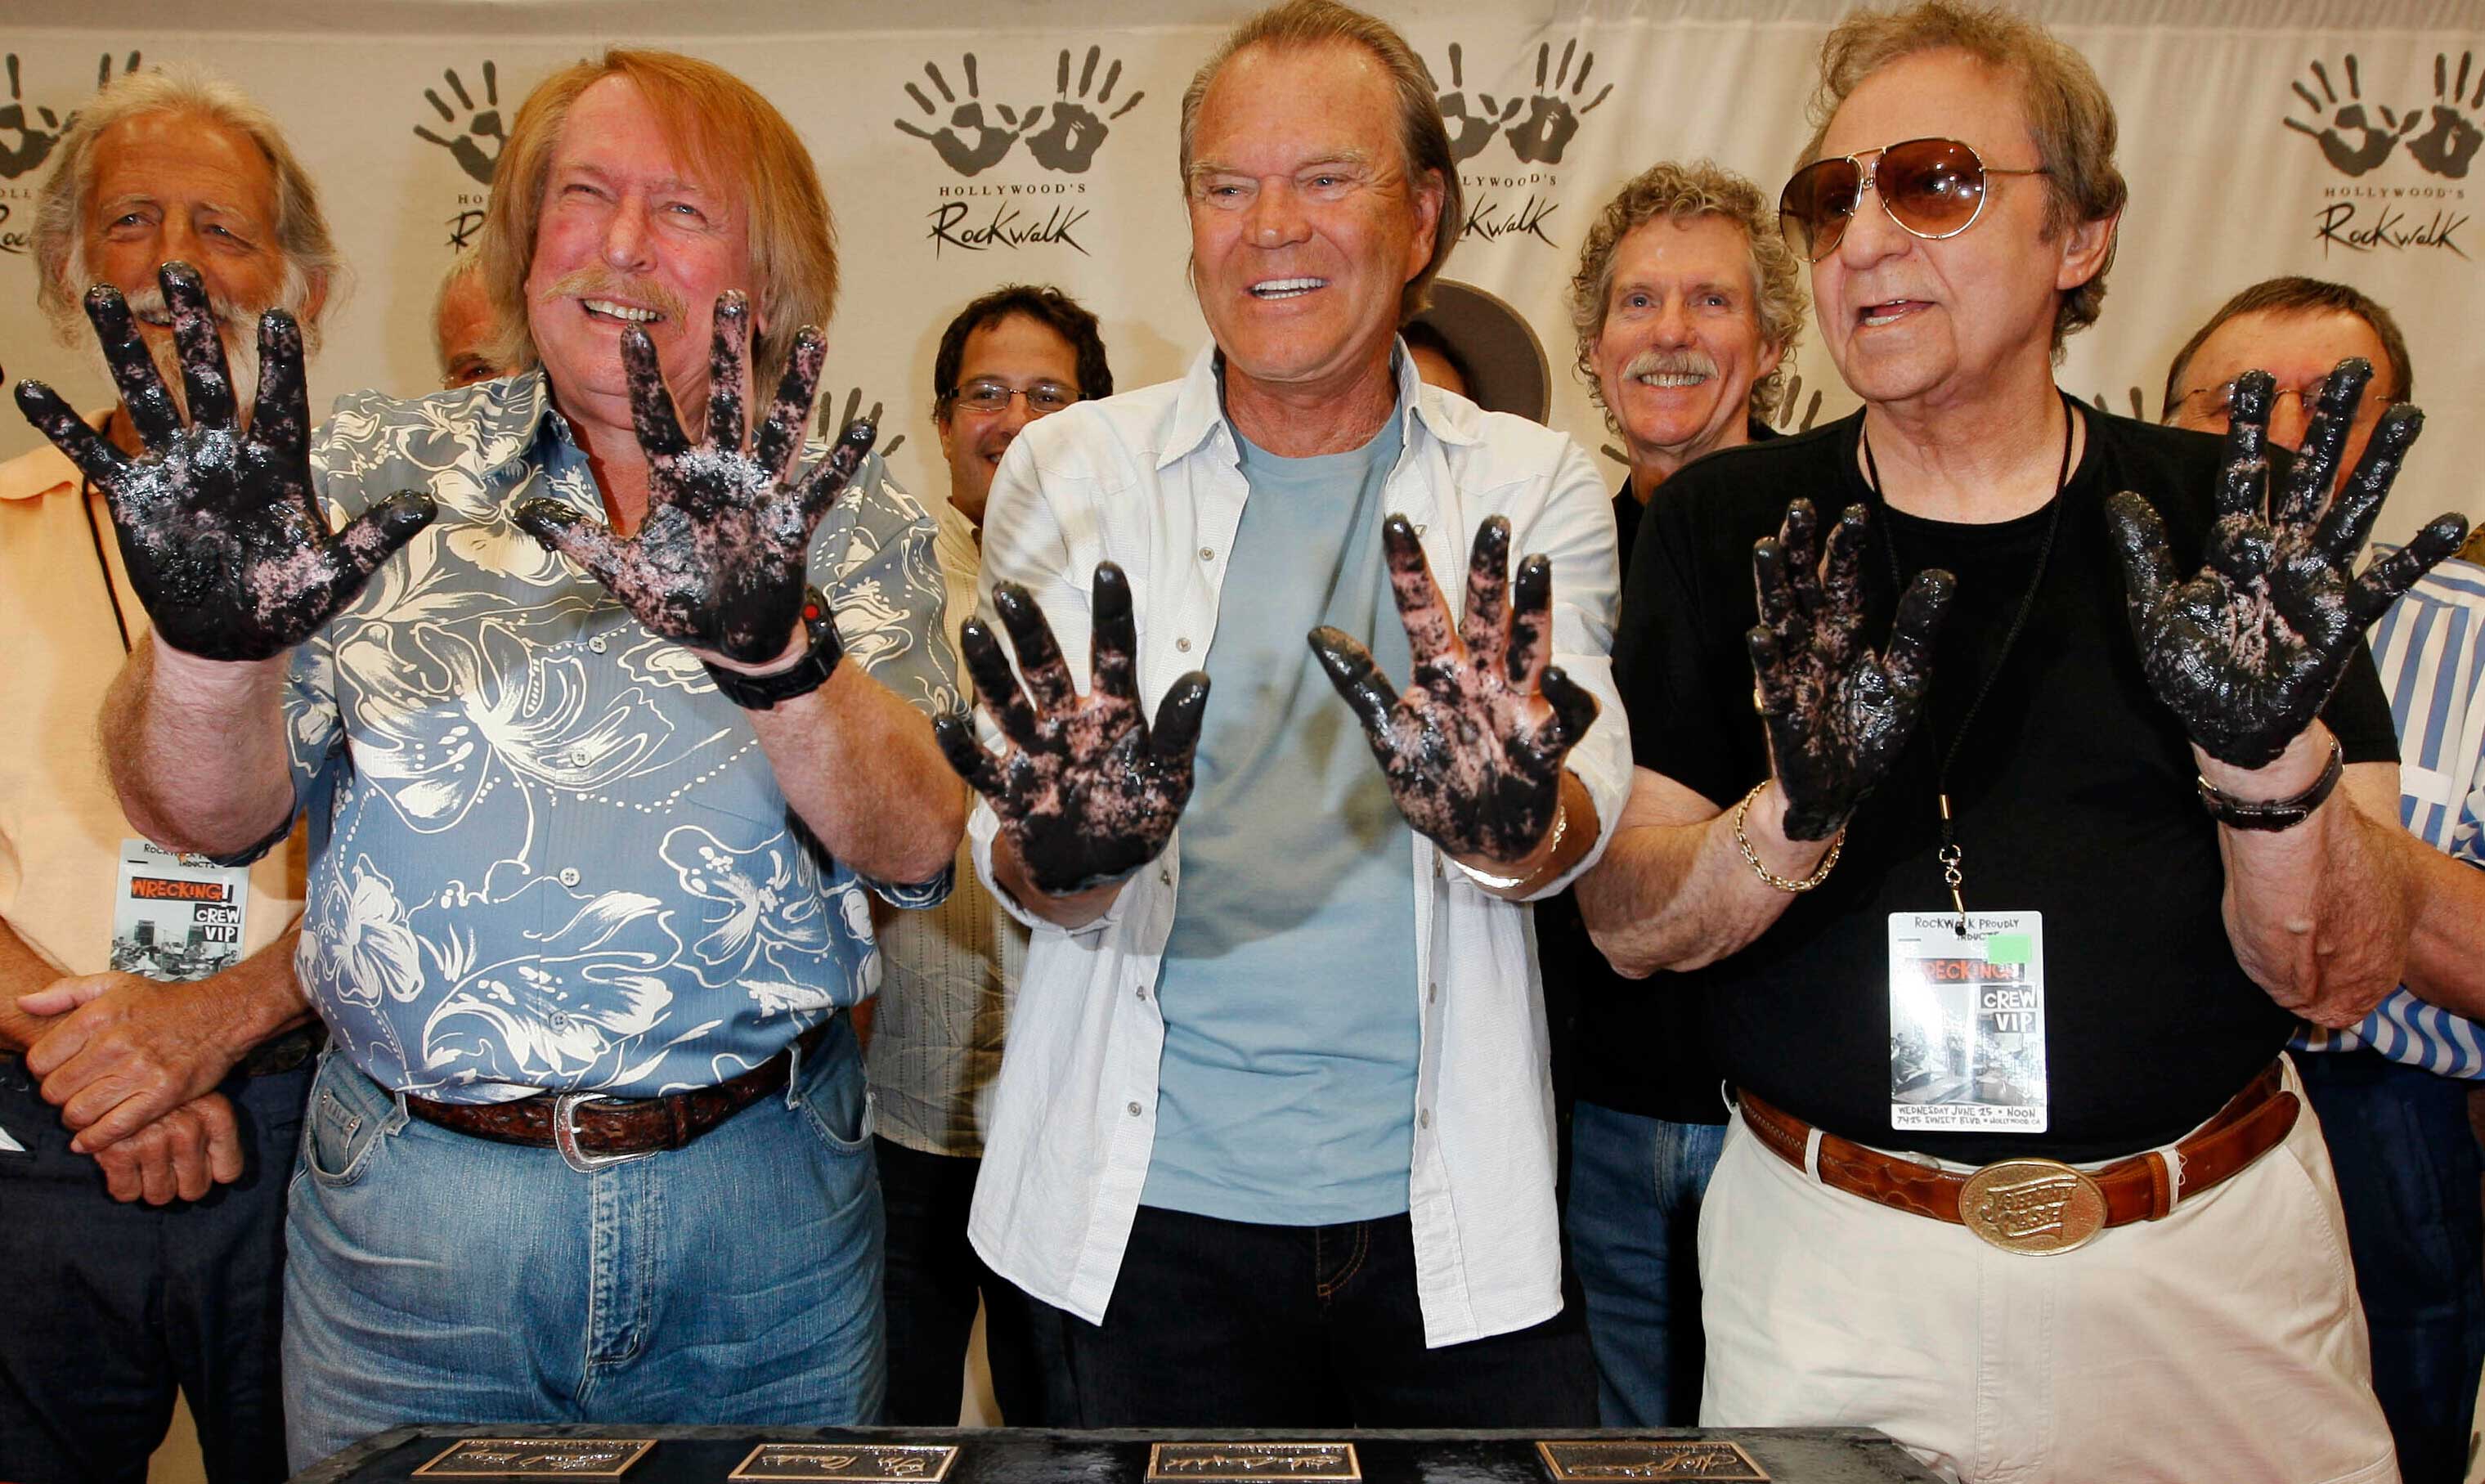 (From left) Don Randi, Glen Campbell and Hal Blaine, representing session musicians known as 'The Wrecking Crew', hold up their hands after placing them in the cement following the induction ceremony for Hollywood's RockWalk in Los Angeles, on June 25, 2008. 